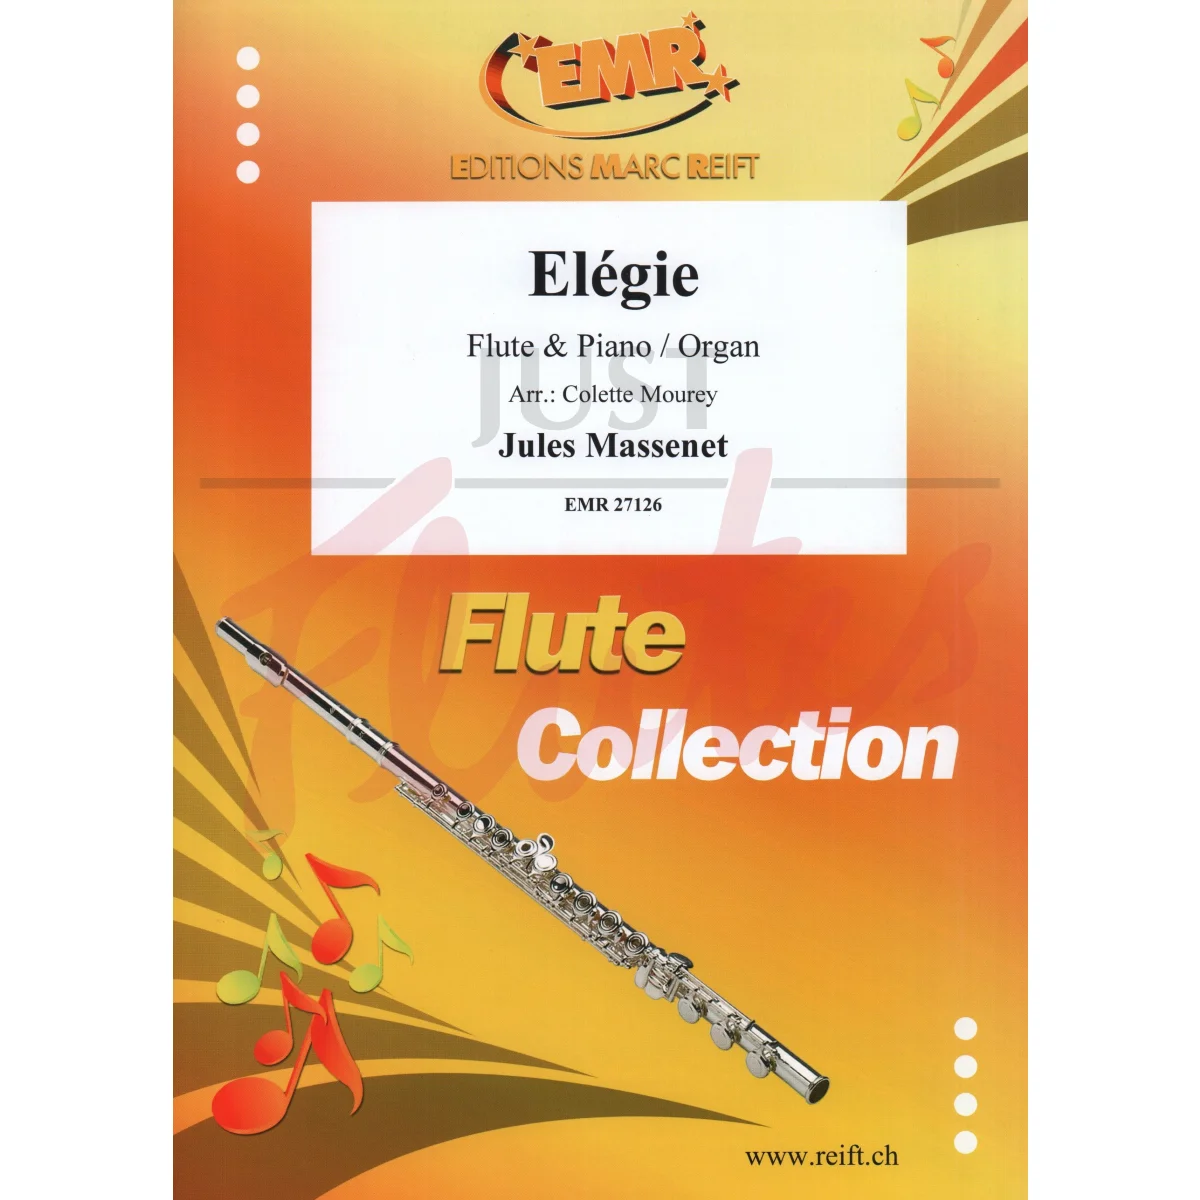 Elégie for Flute and Piano/Organ